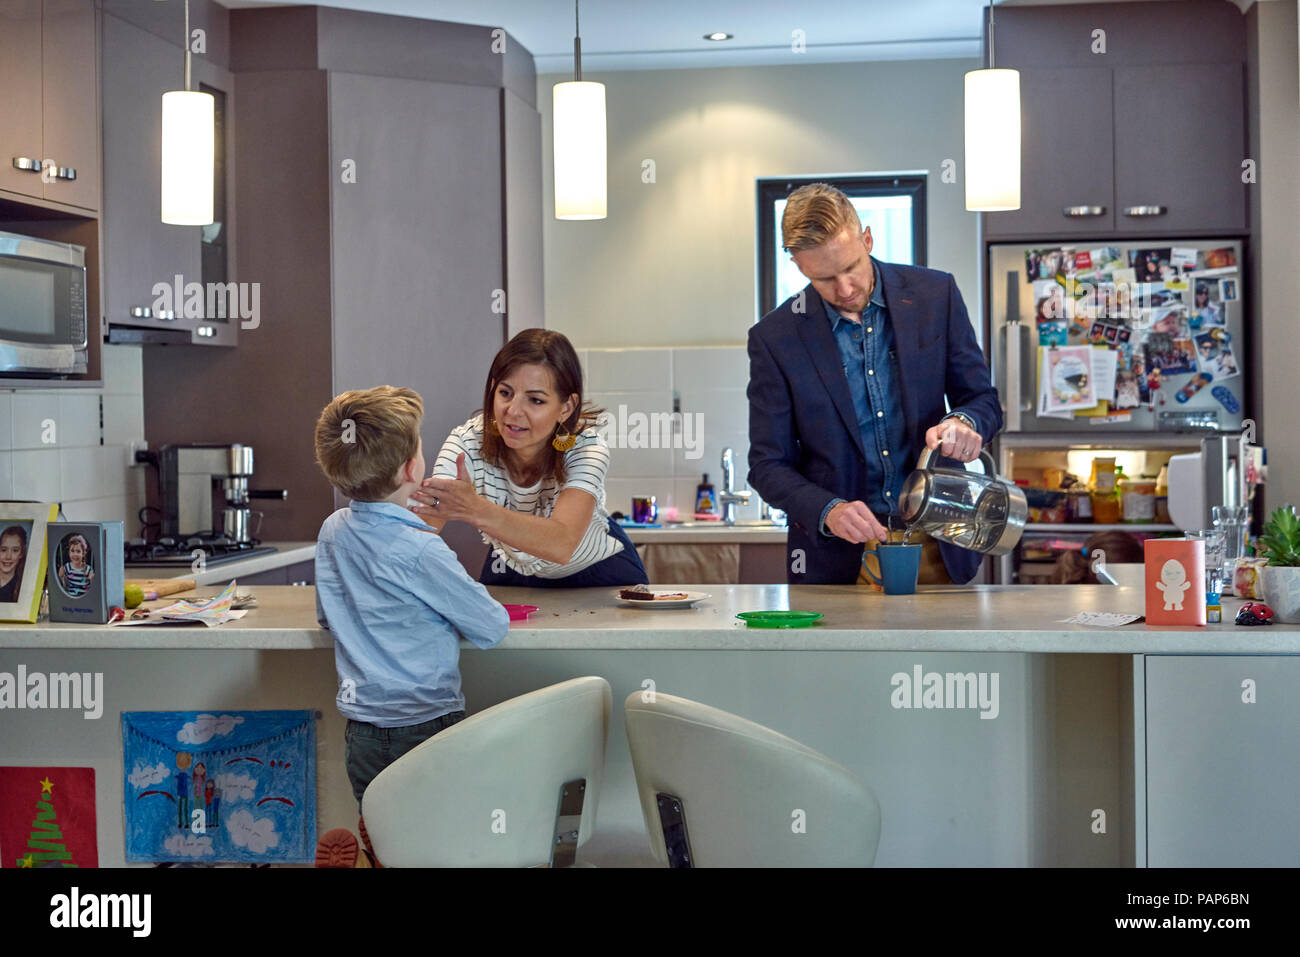 Everyday Scene of a family in kitchen at home Stock Photo